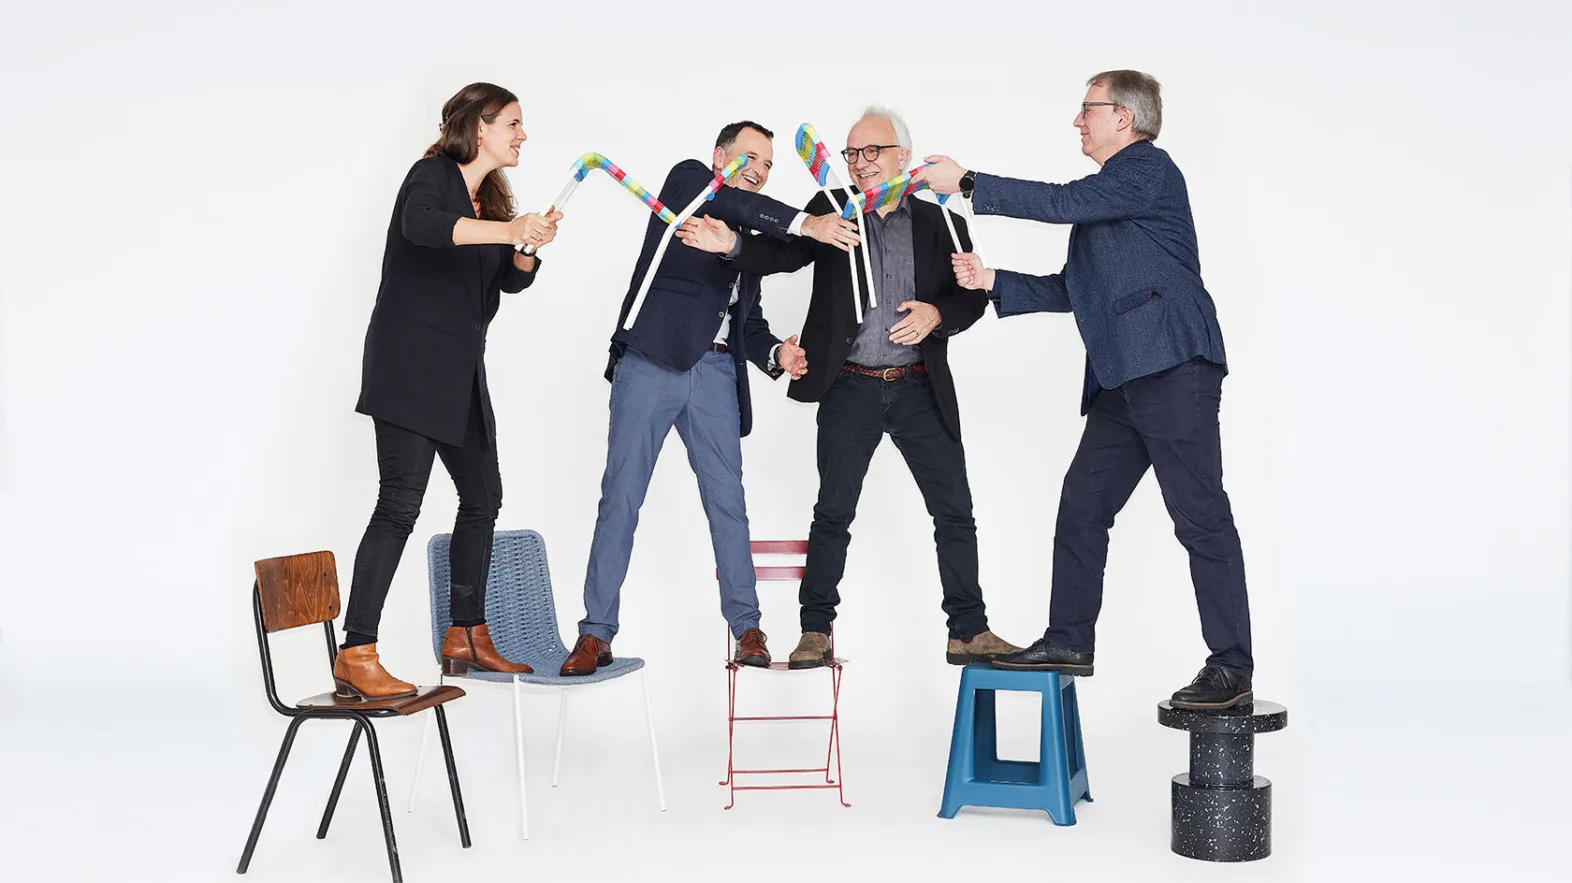 Four people stand with one leg on each on chairs or stools, arranged in a semi-circle and hold up two small, colourful chairs together.